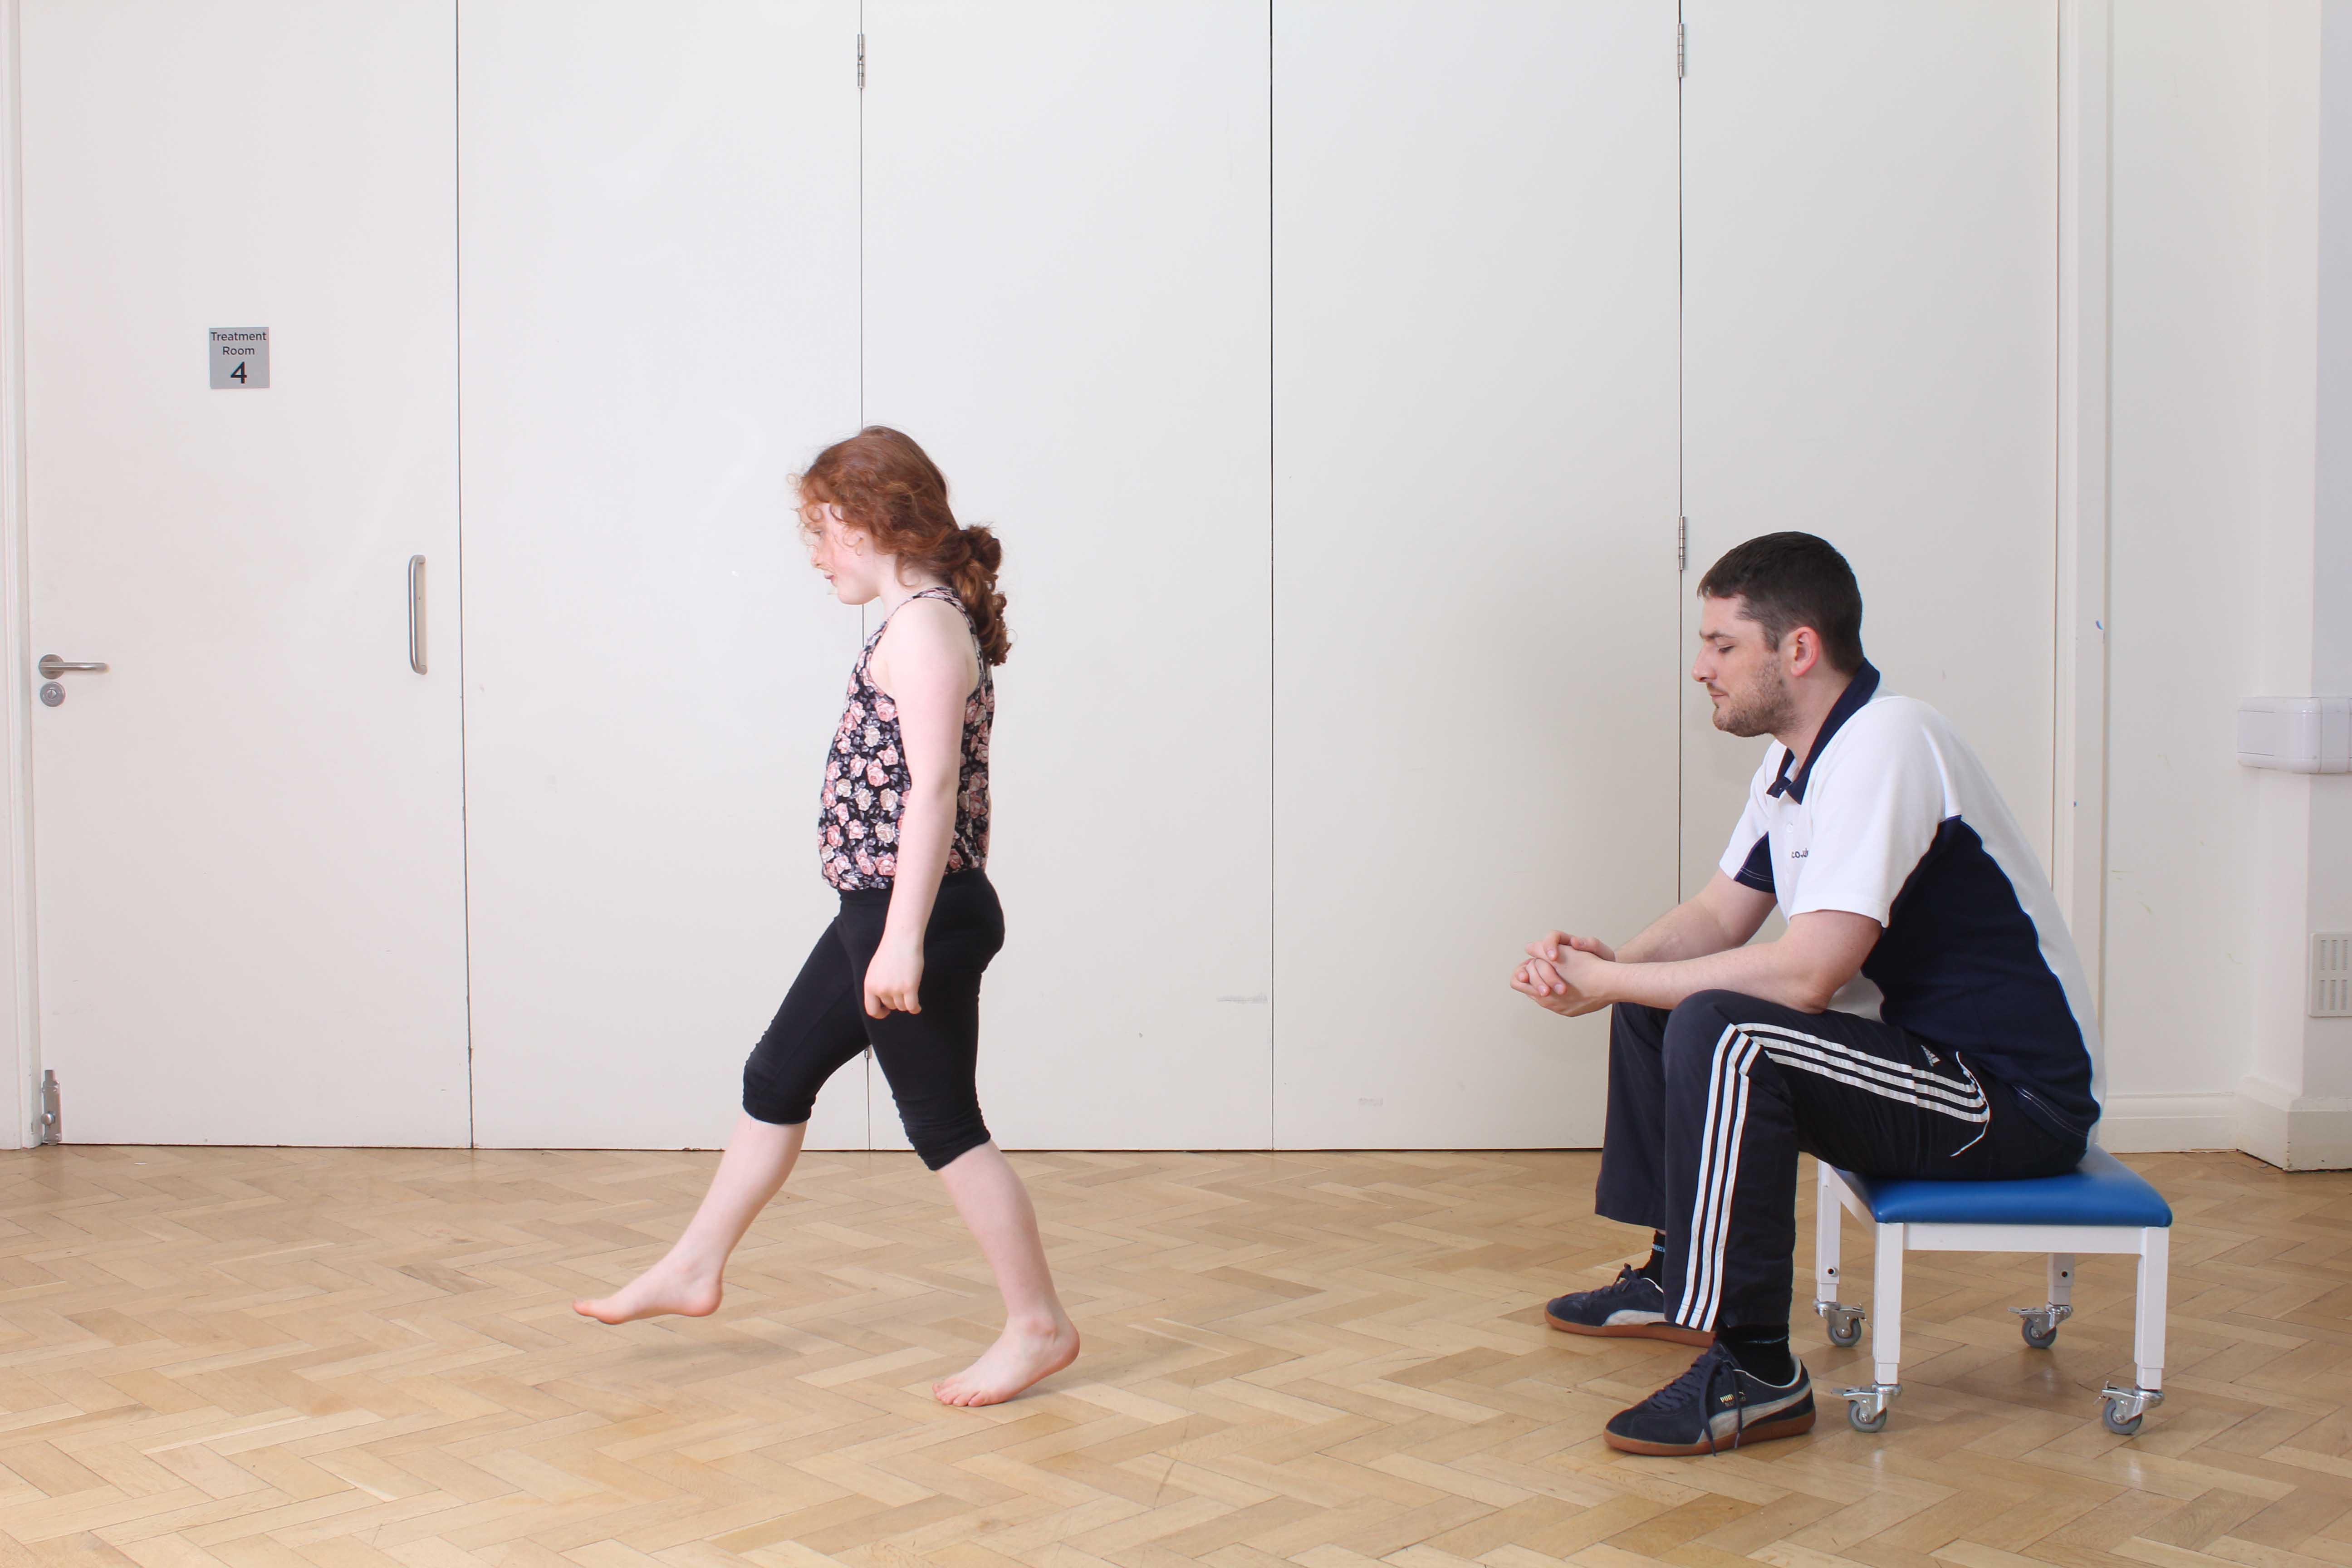 Physiotherapy can help correct any abnormal gait patterns.